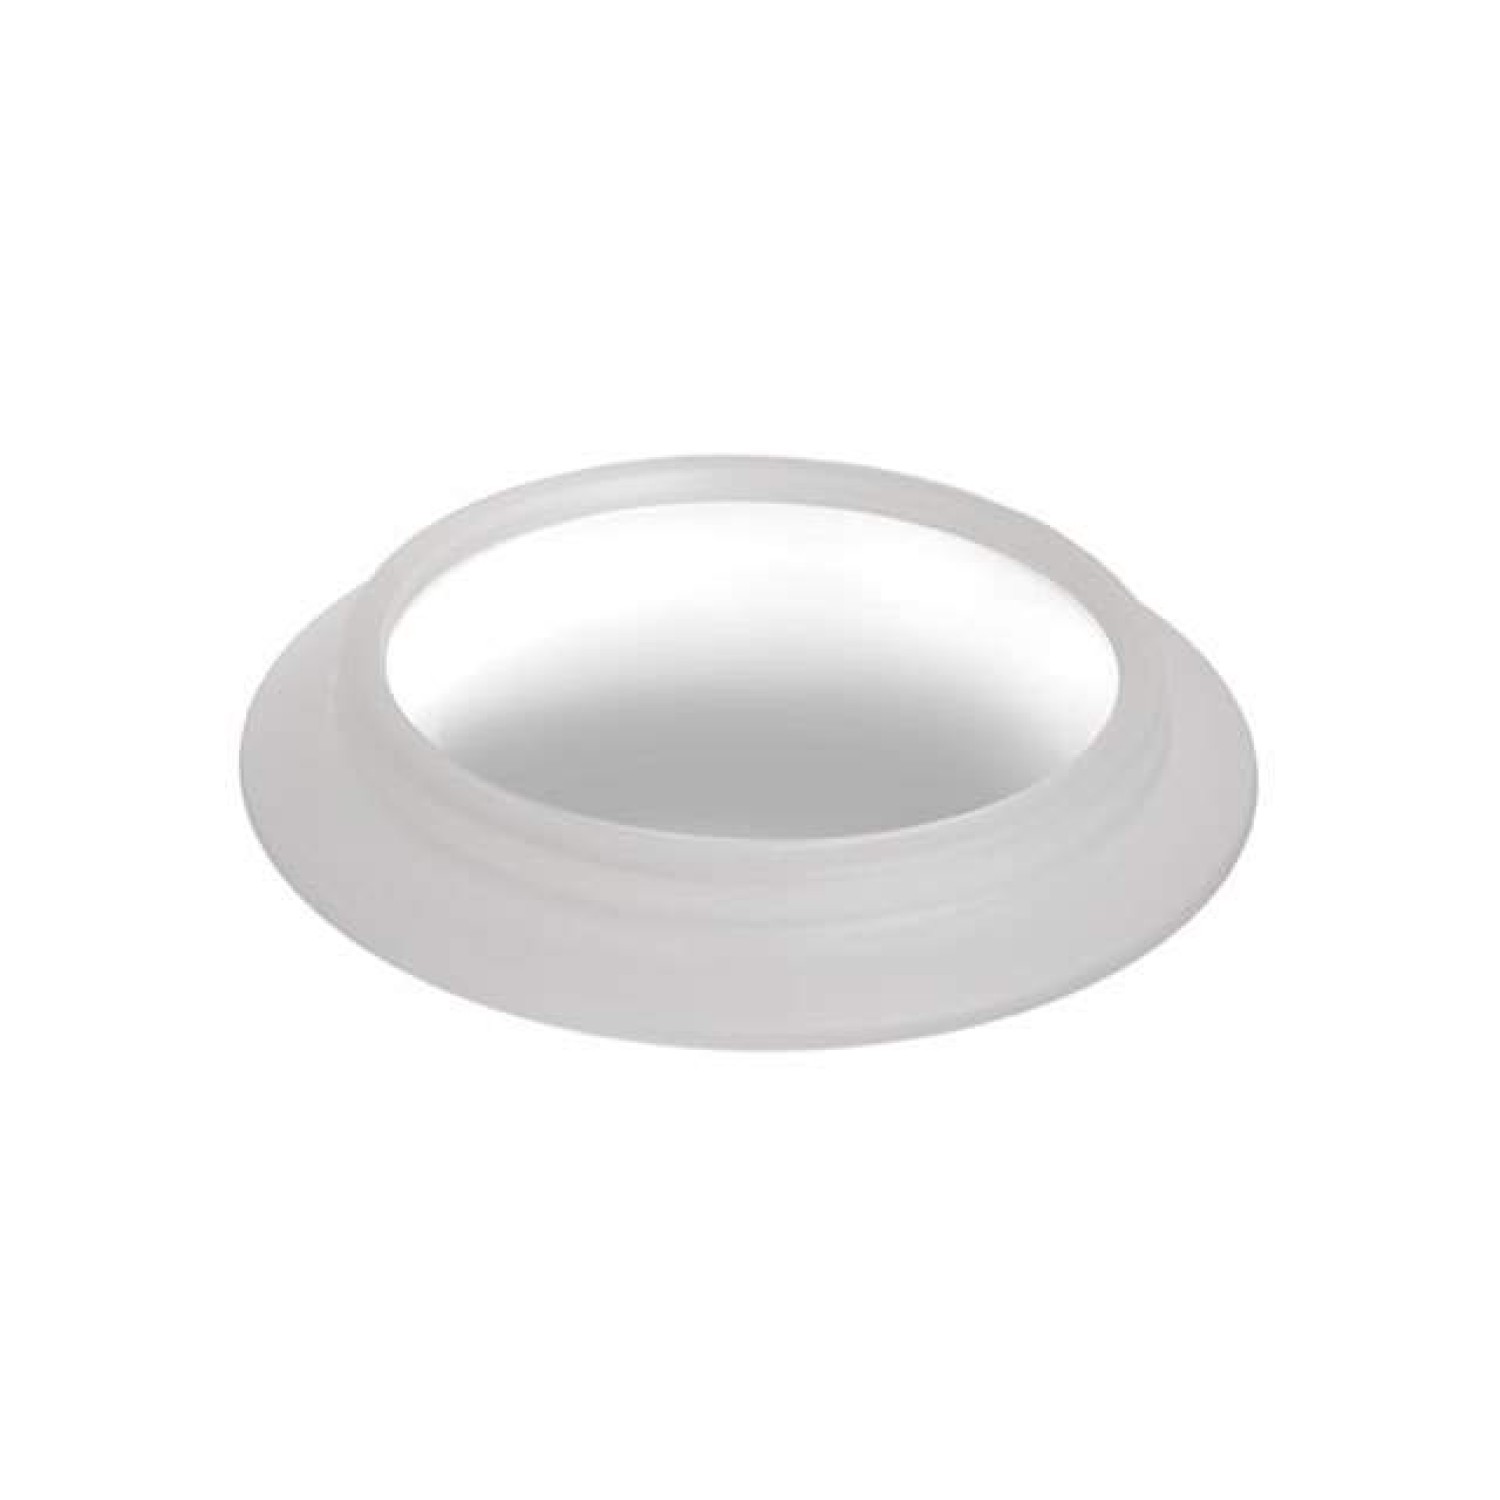 Luxo SPD025979 STAYS Lens, 6 Diopter